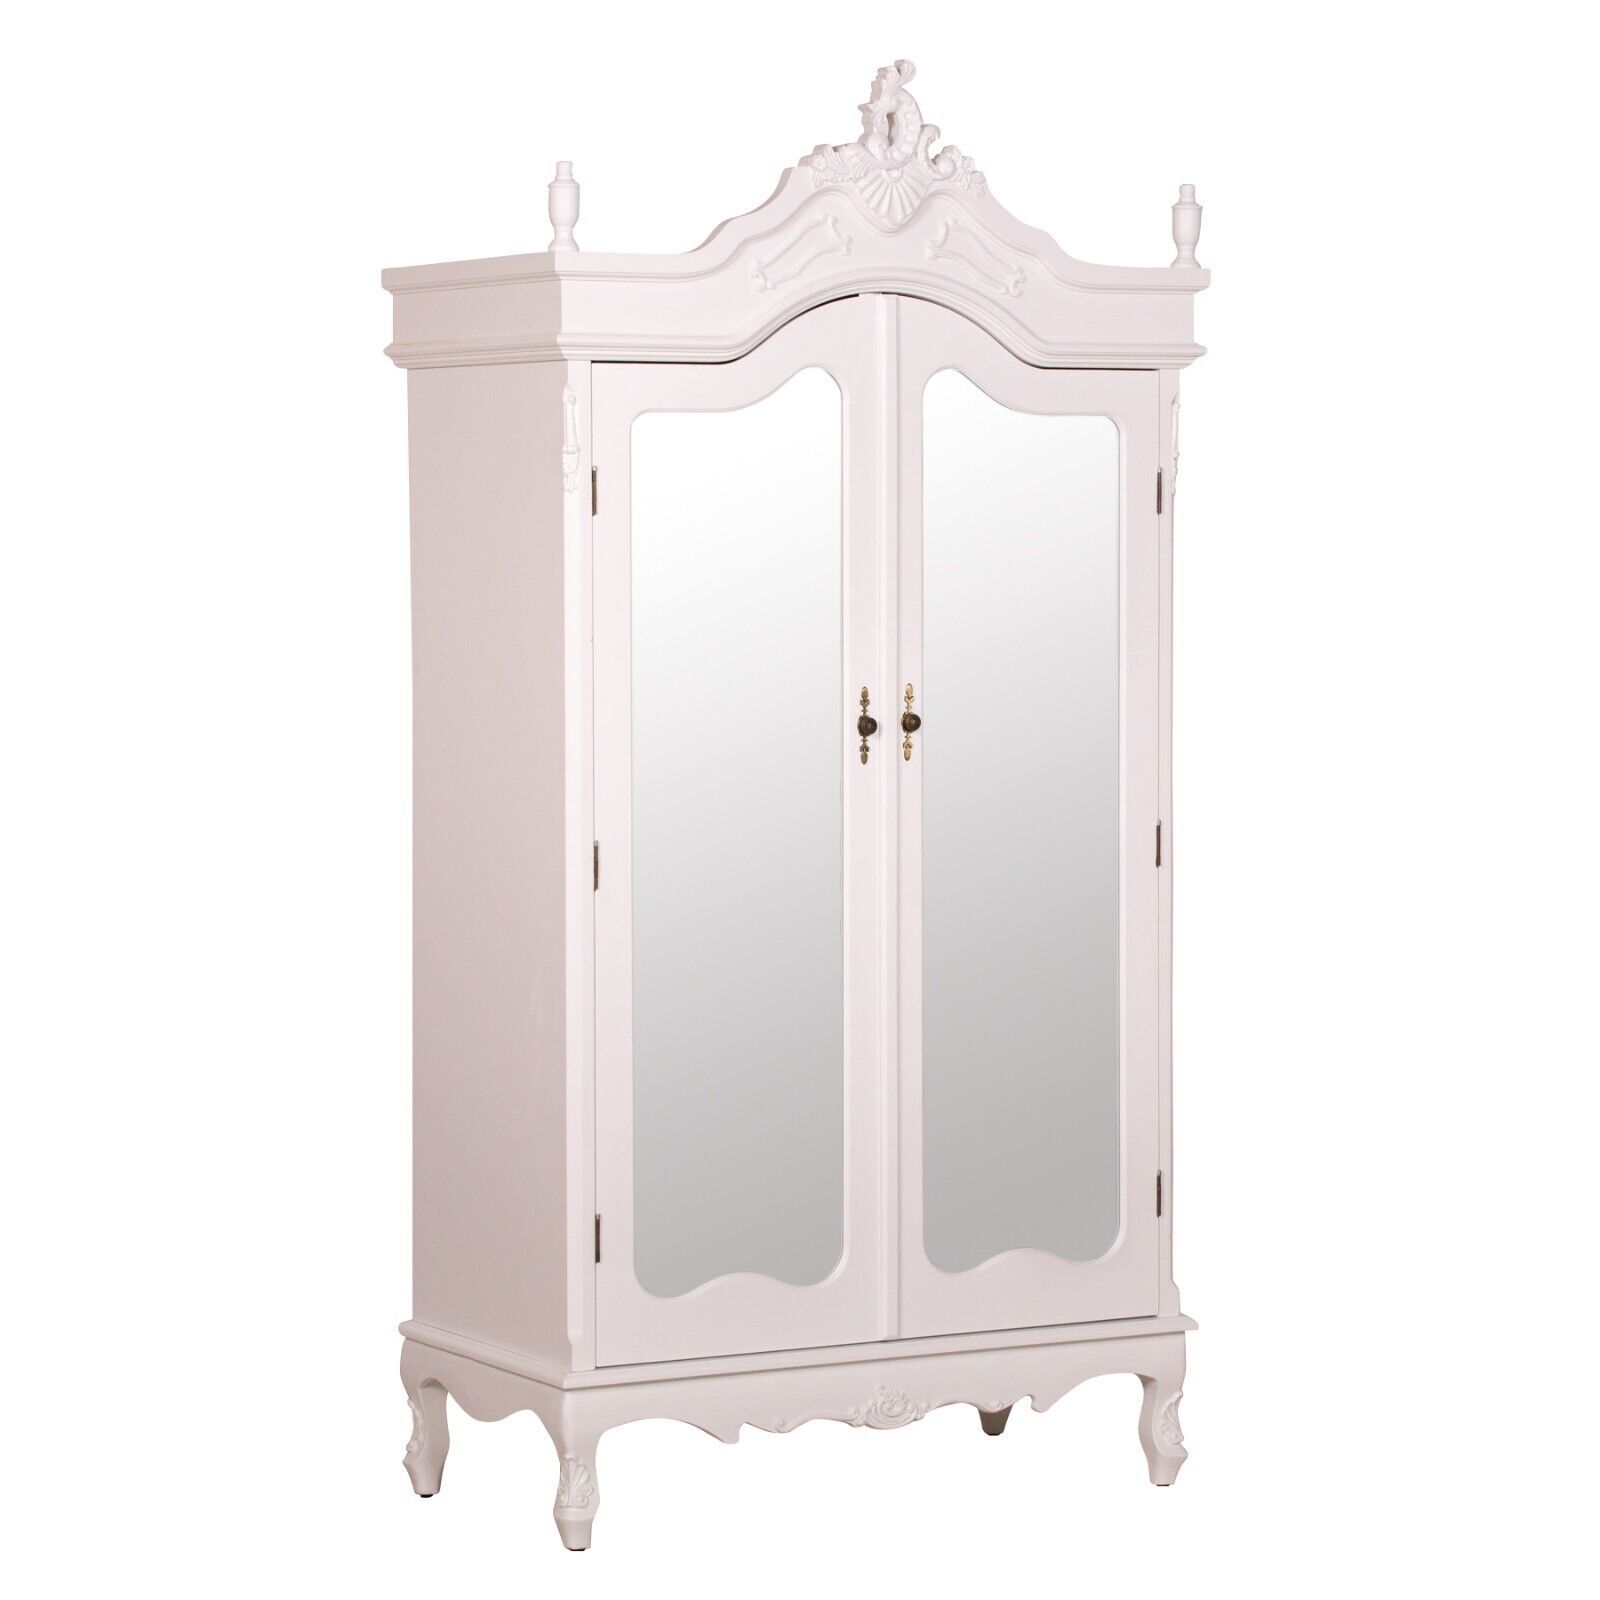 French Antique White Chateau Shabby Chic Mirrored Double Armoire Wardrobe |  Ebay Pertaining To Large Shabby Chic Wardrobes (View 11 of 15)